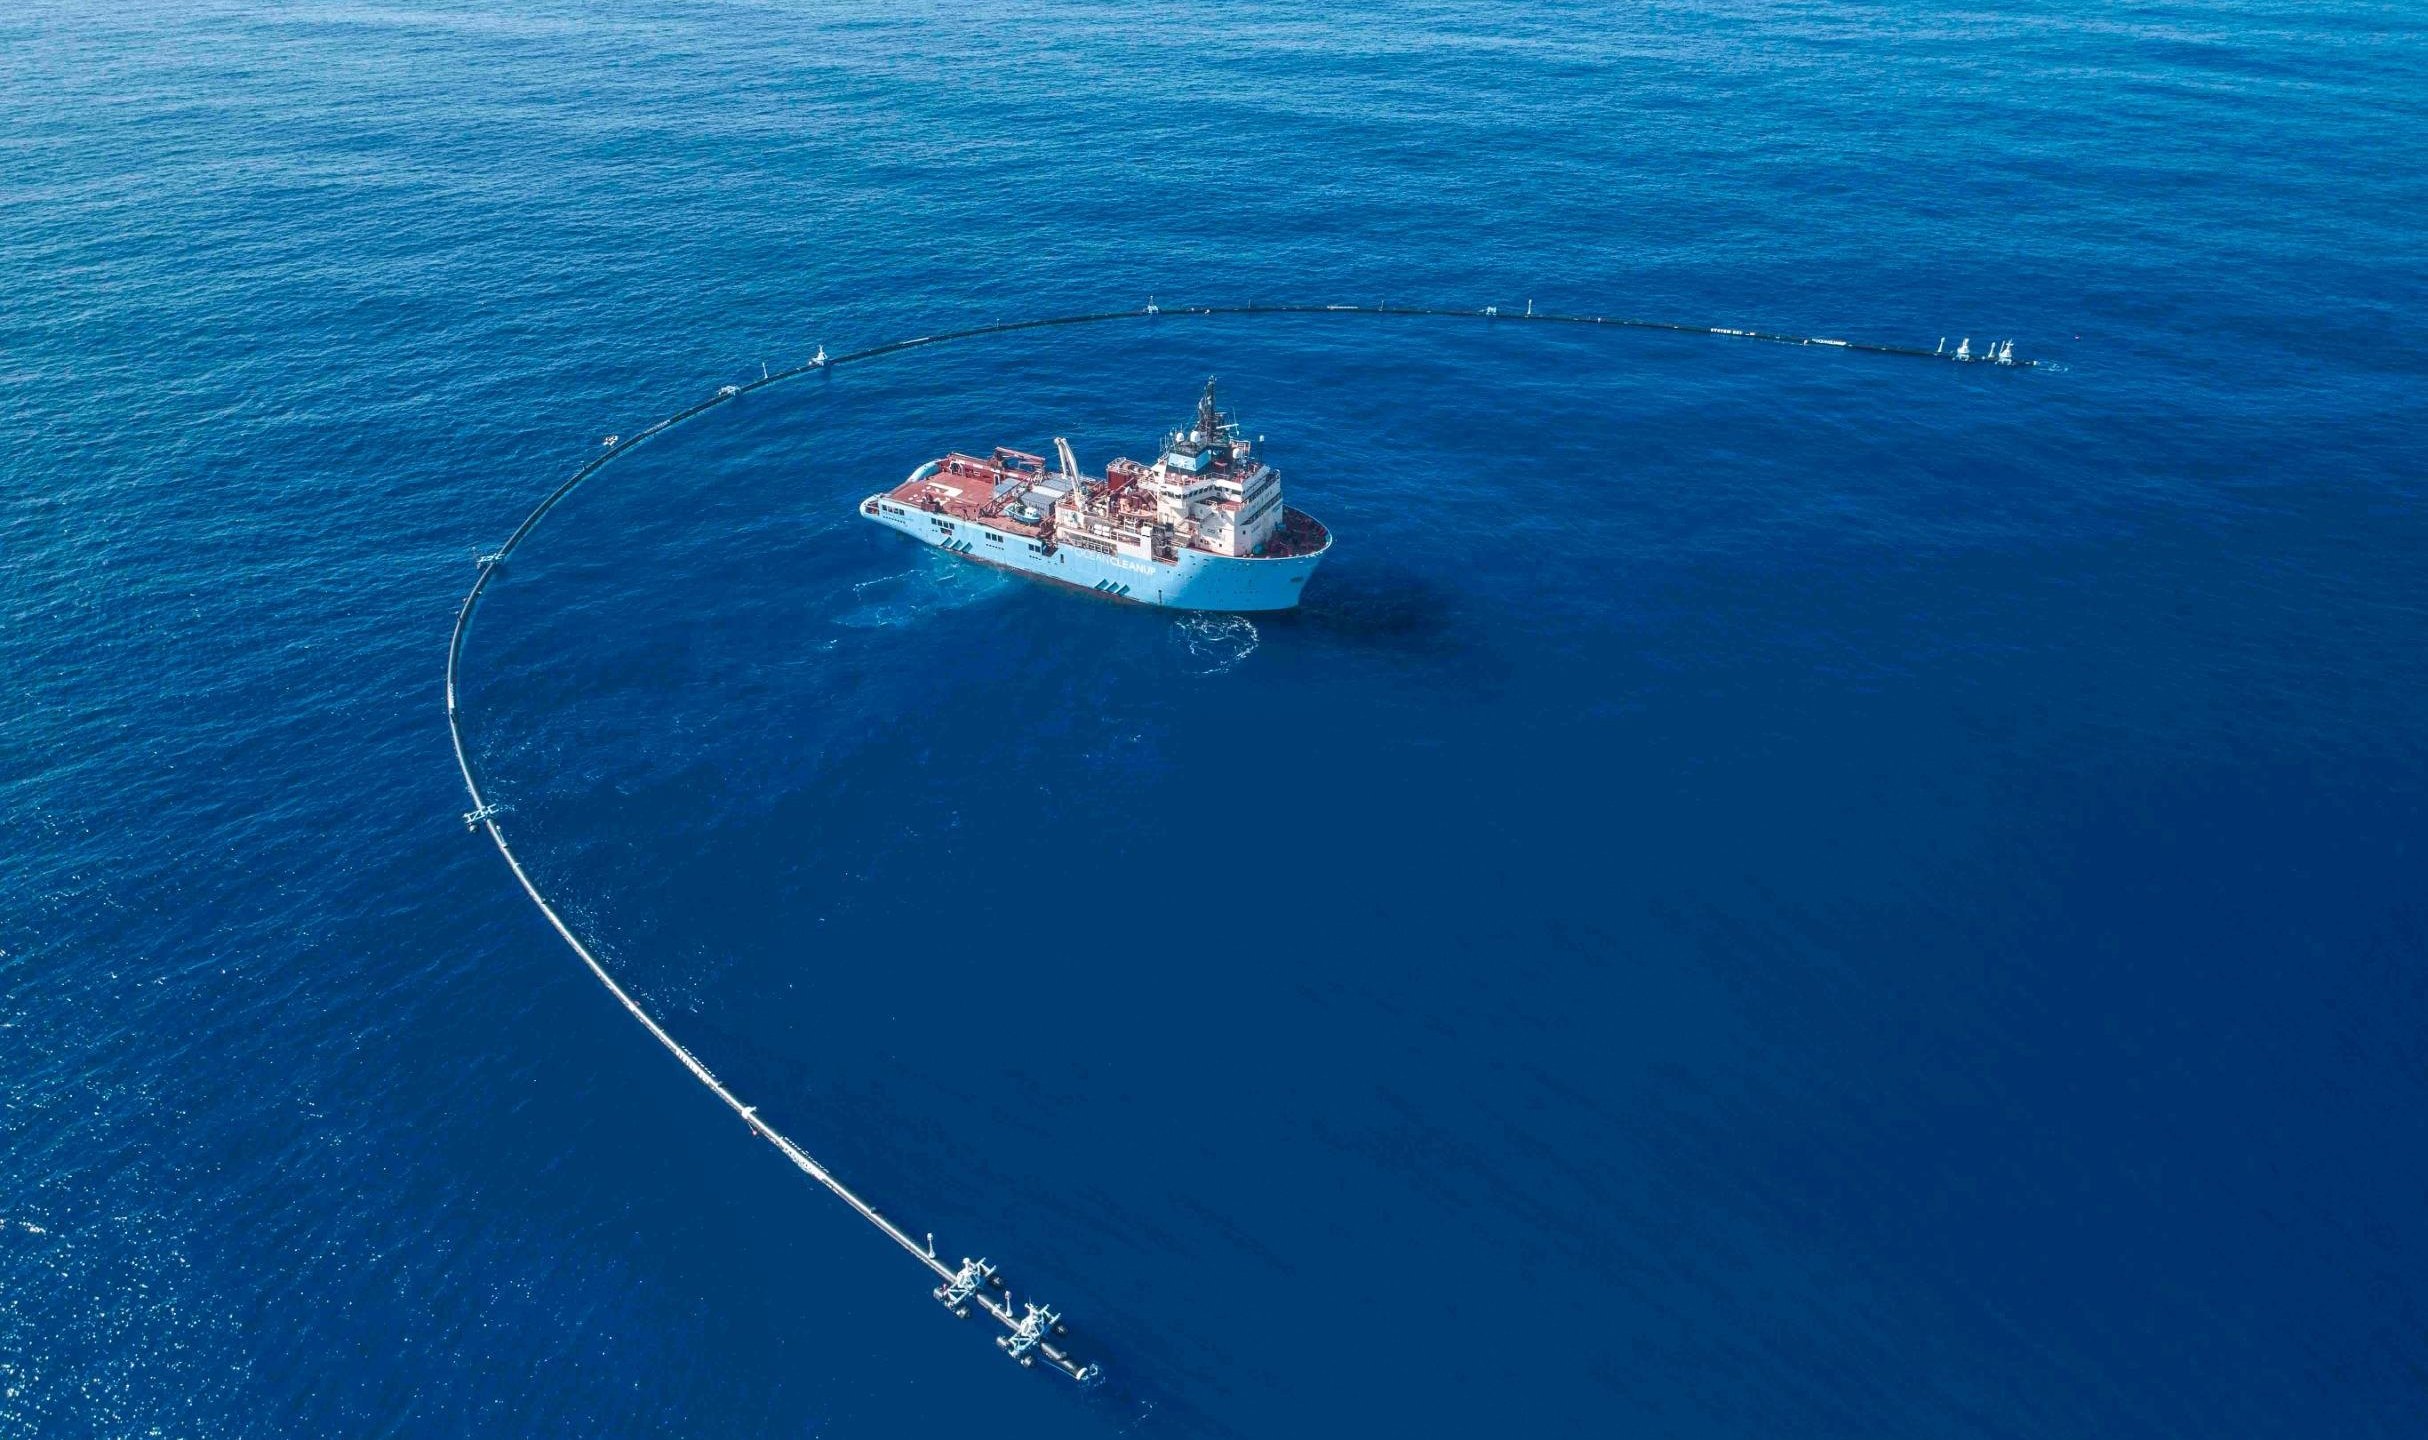 The 2,000-foot-long system created to clean up plastic pollution in the Pacific Ocean appears in an undated photo. (Credit: The Ocean Cleanup via CNN)